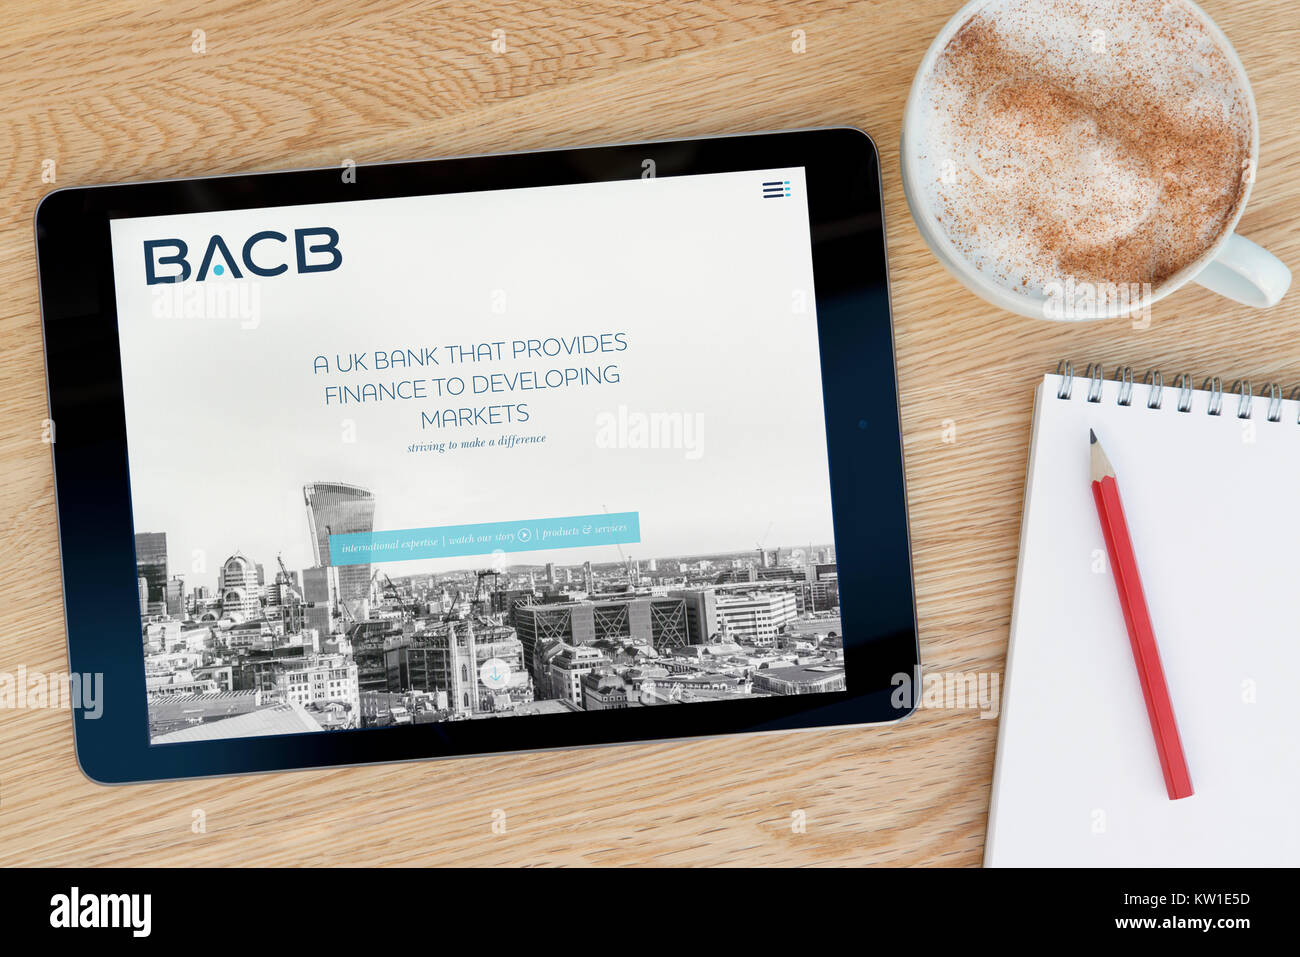 The BACB (British Arab Commercial Bank) website on an iPad, resting on a wooden table beside a notepad, pencil and cup of coffee (Editorial use only). Stock Photo